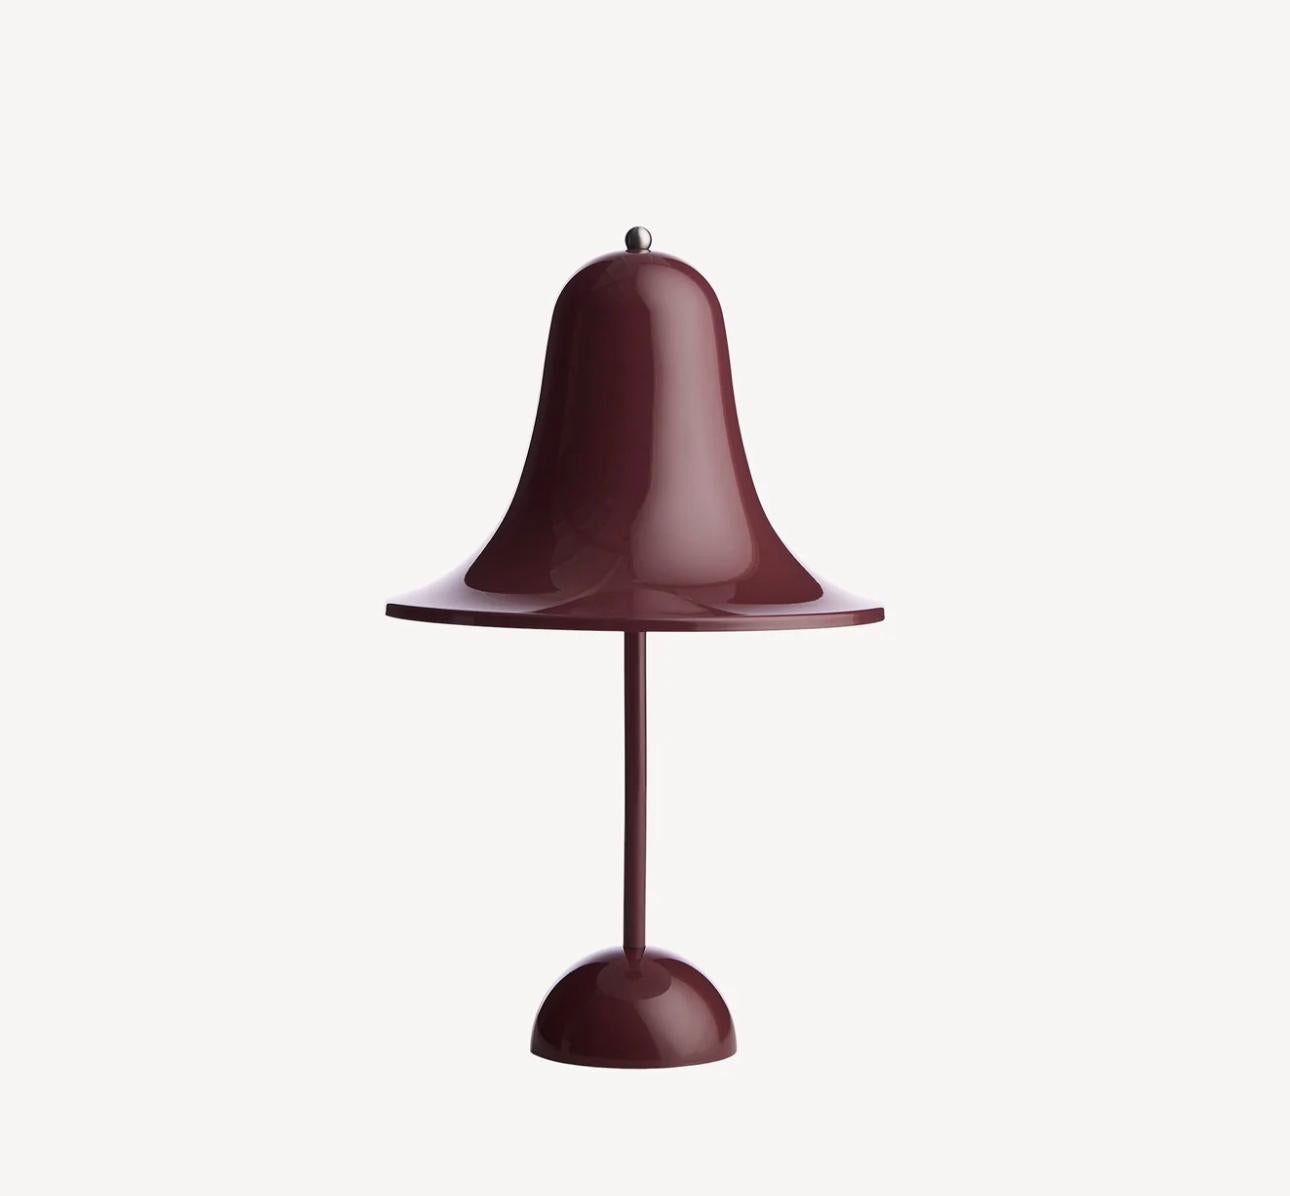 Verner Panton 'Pantop Portable' Wireless Table Lamp in 'Dusty Rose' for Verpan For Sale 1